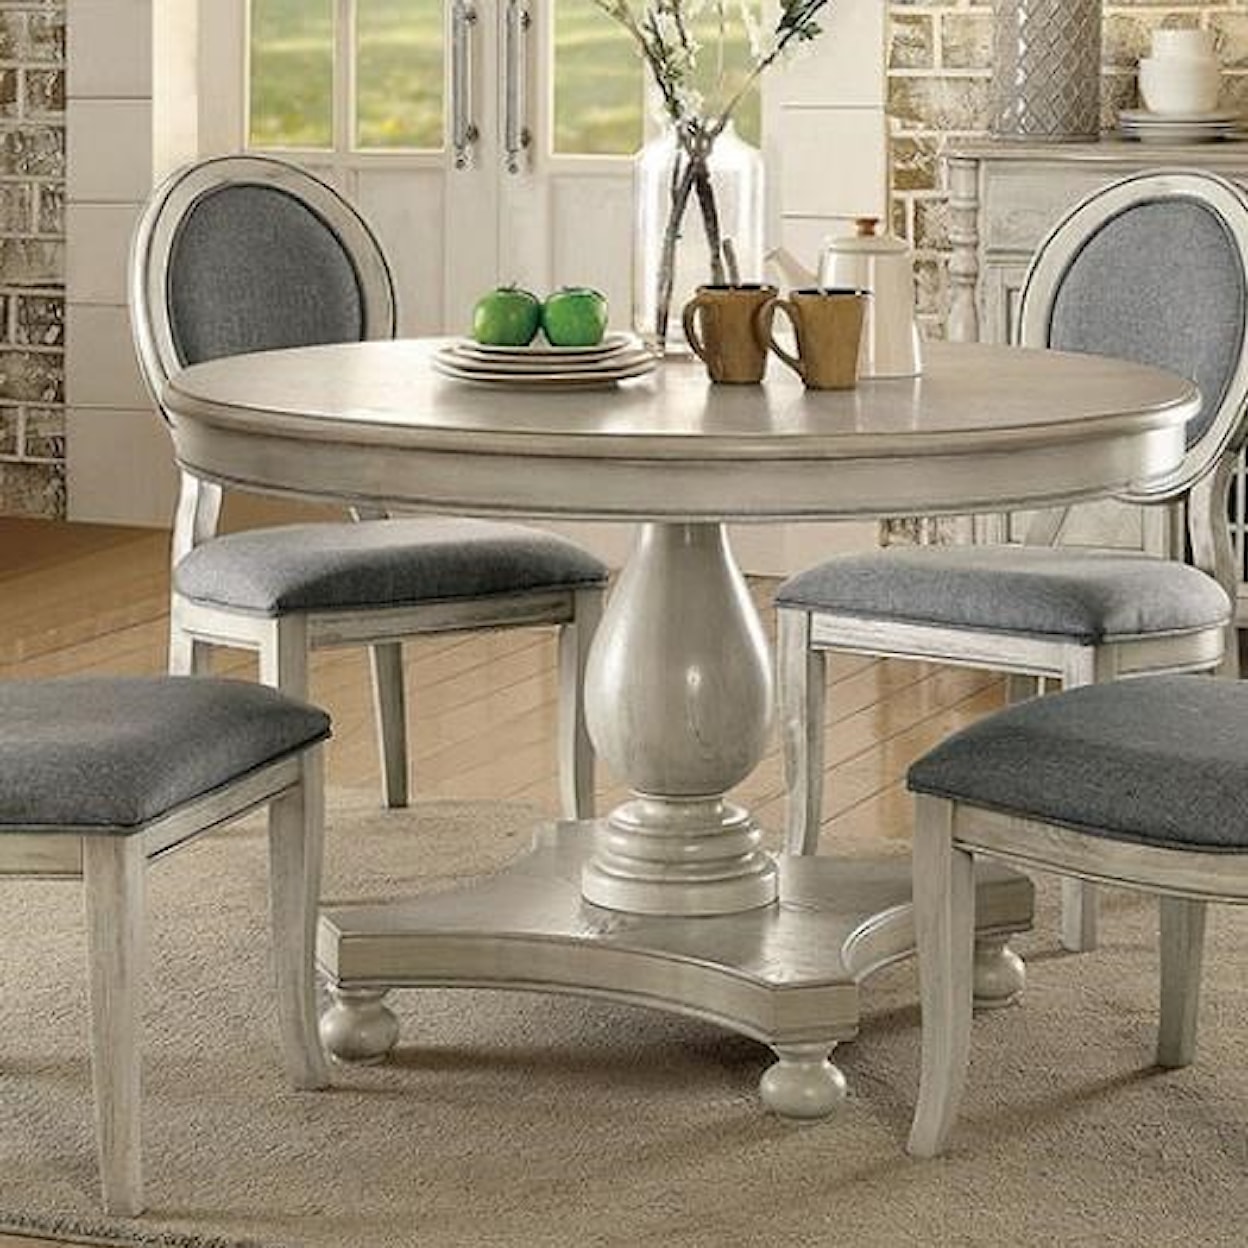 FUSA Kathryn Round Dining Table